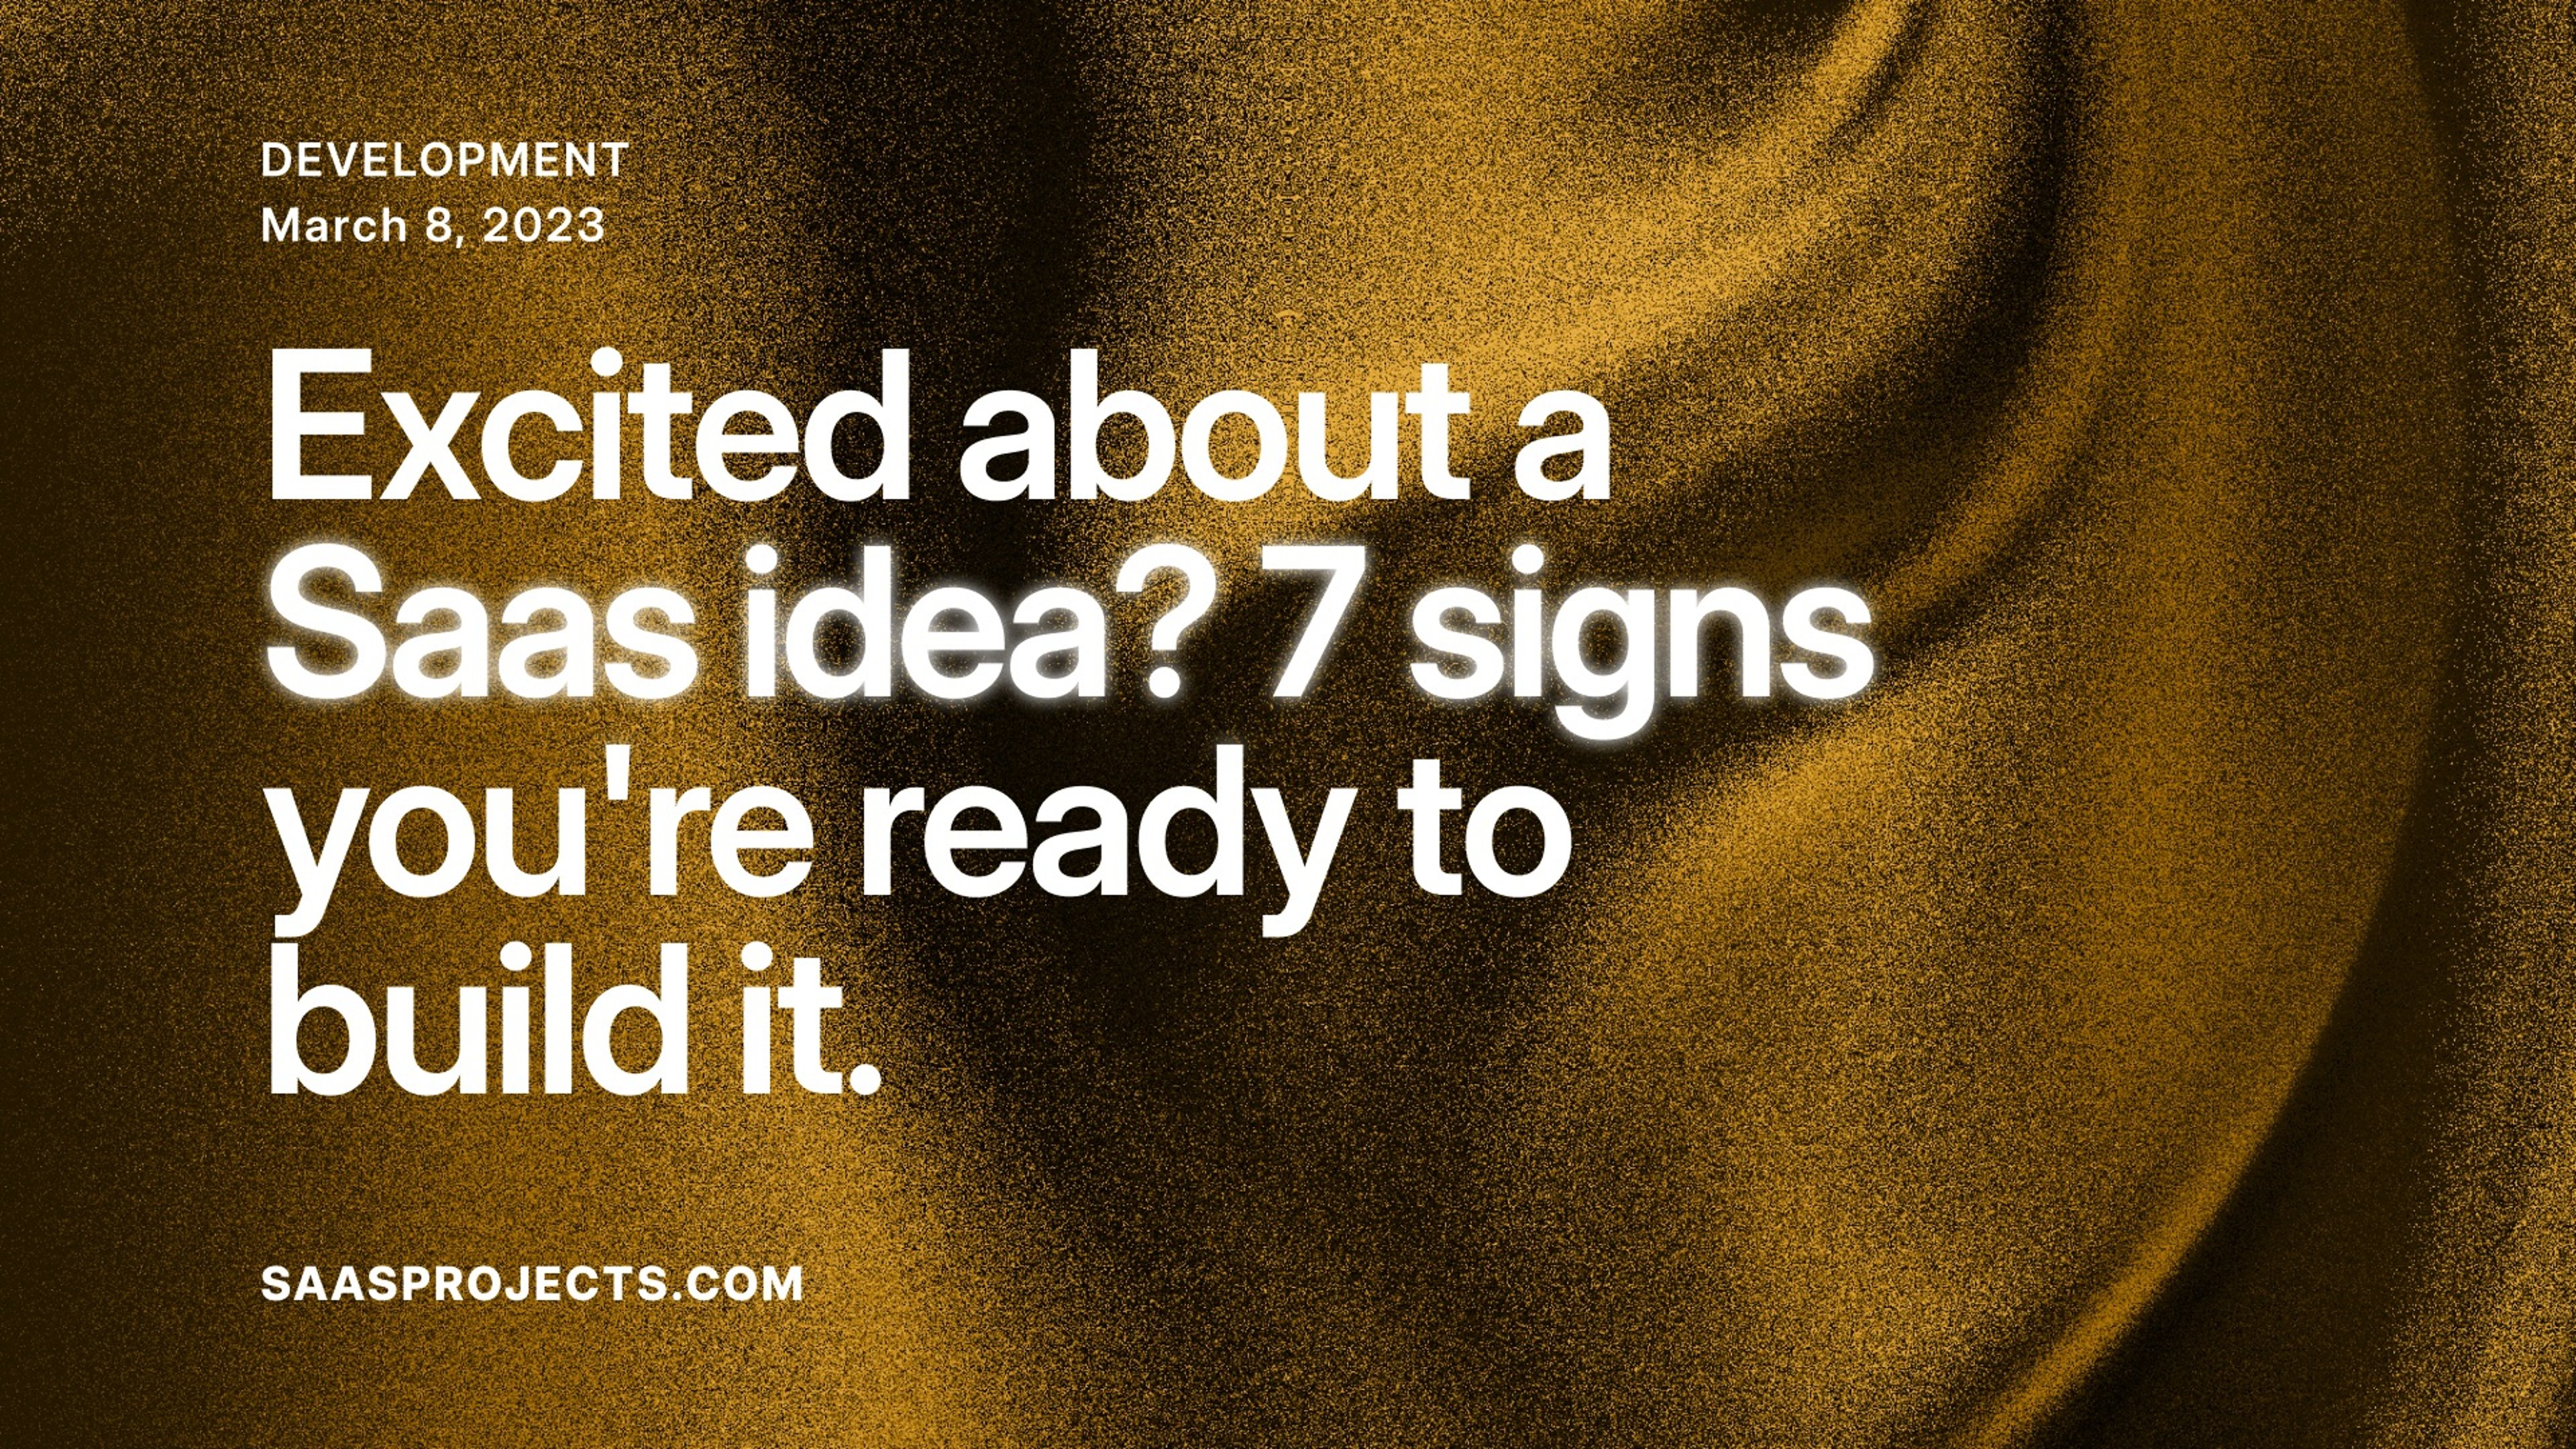 Excited about a Saas idea? 7 signs you're ready to build it.